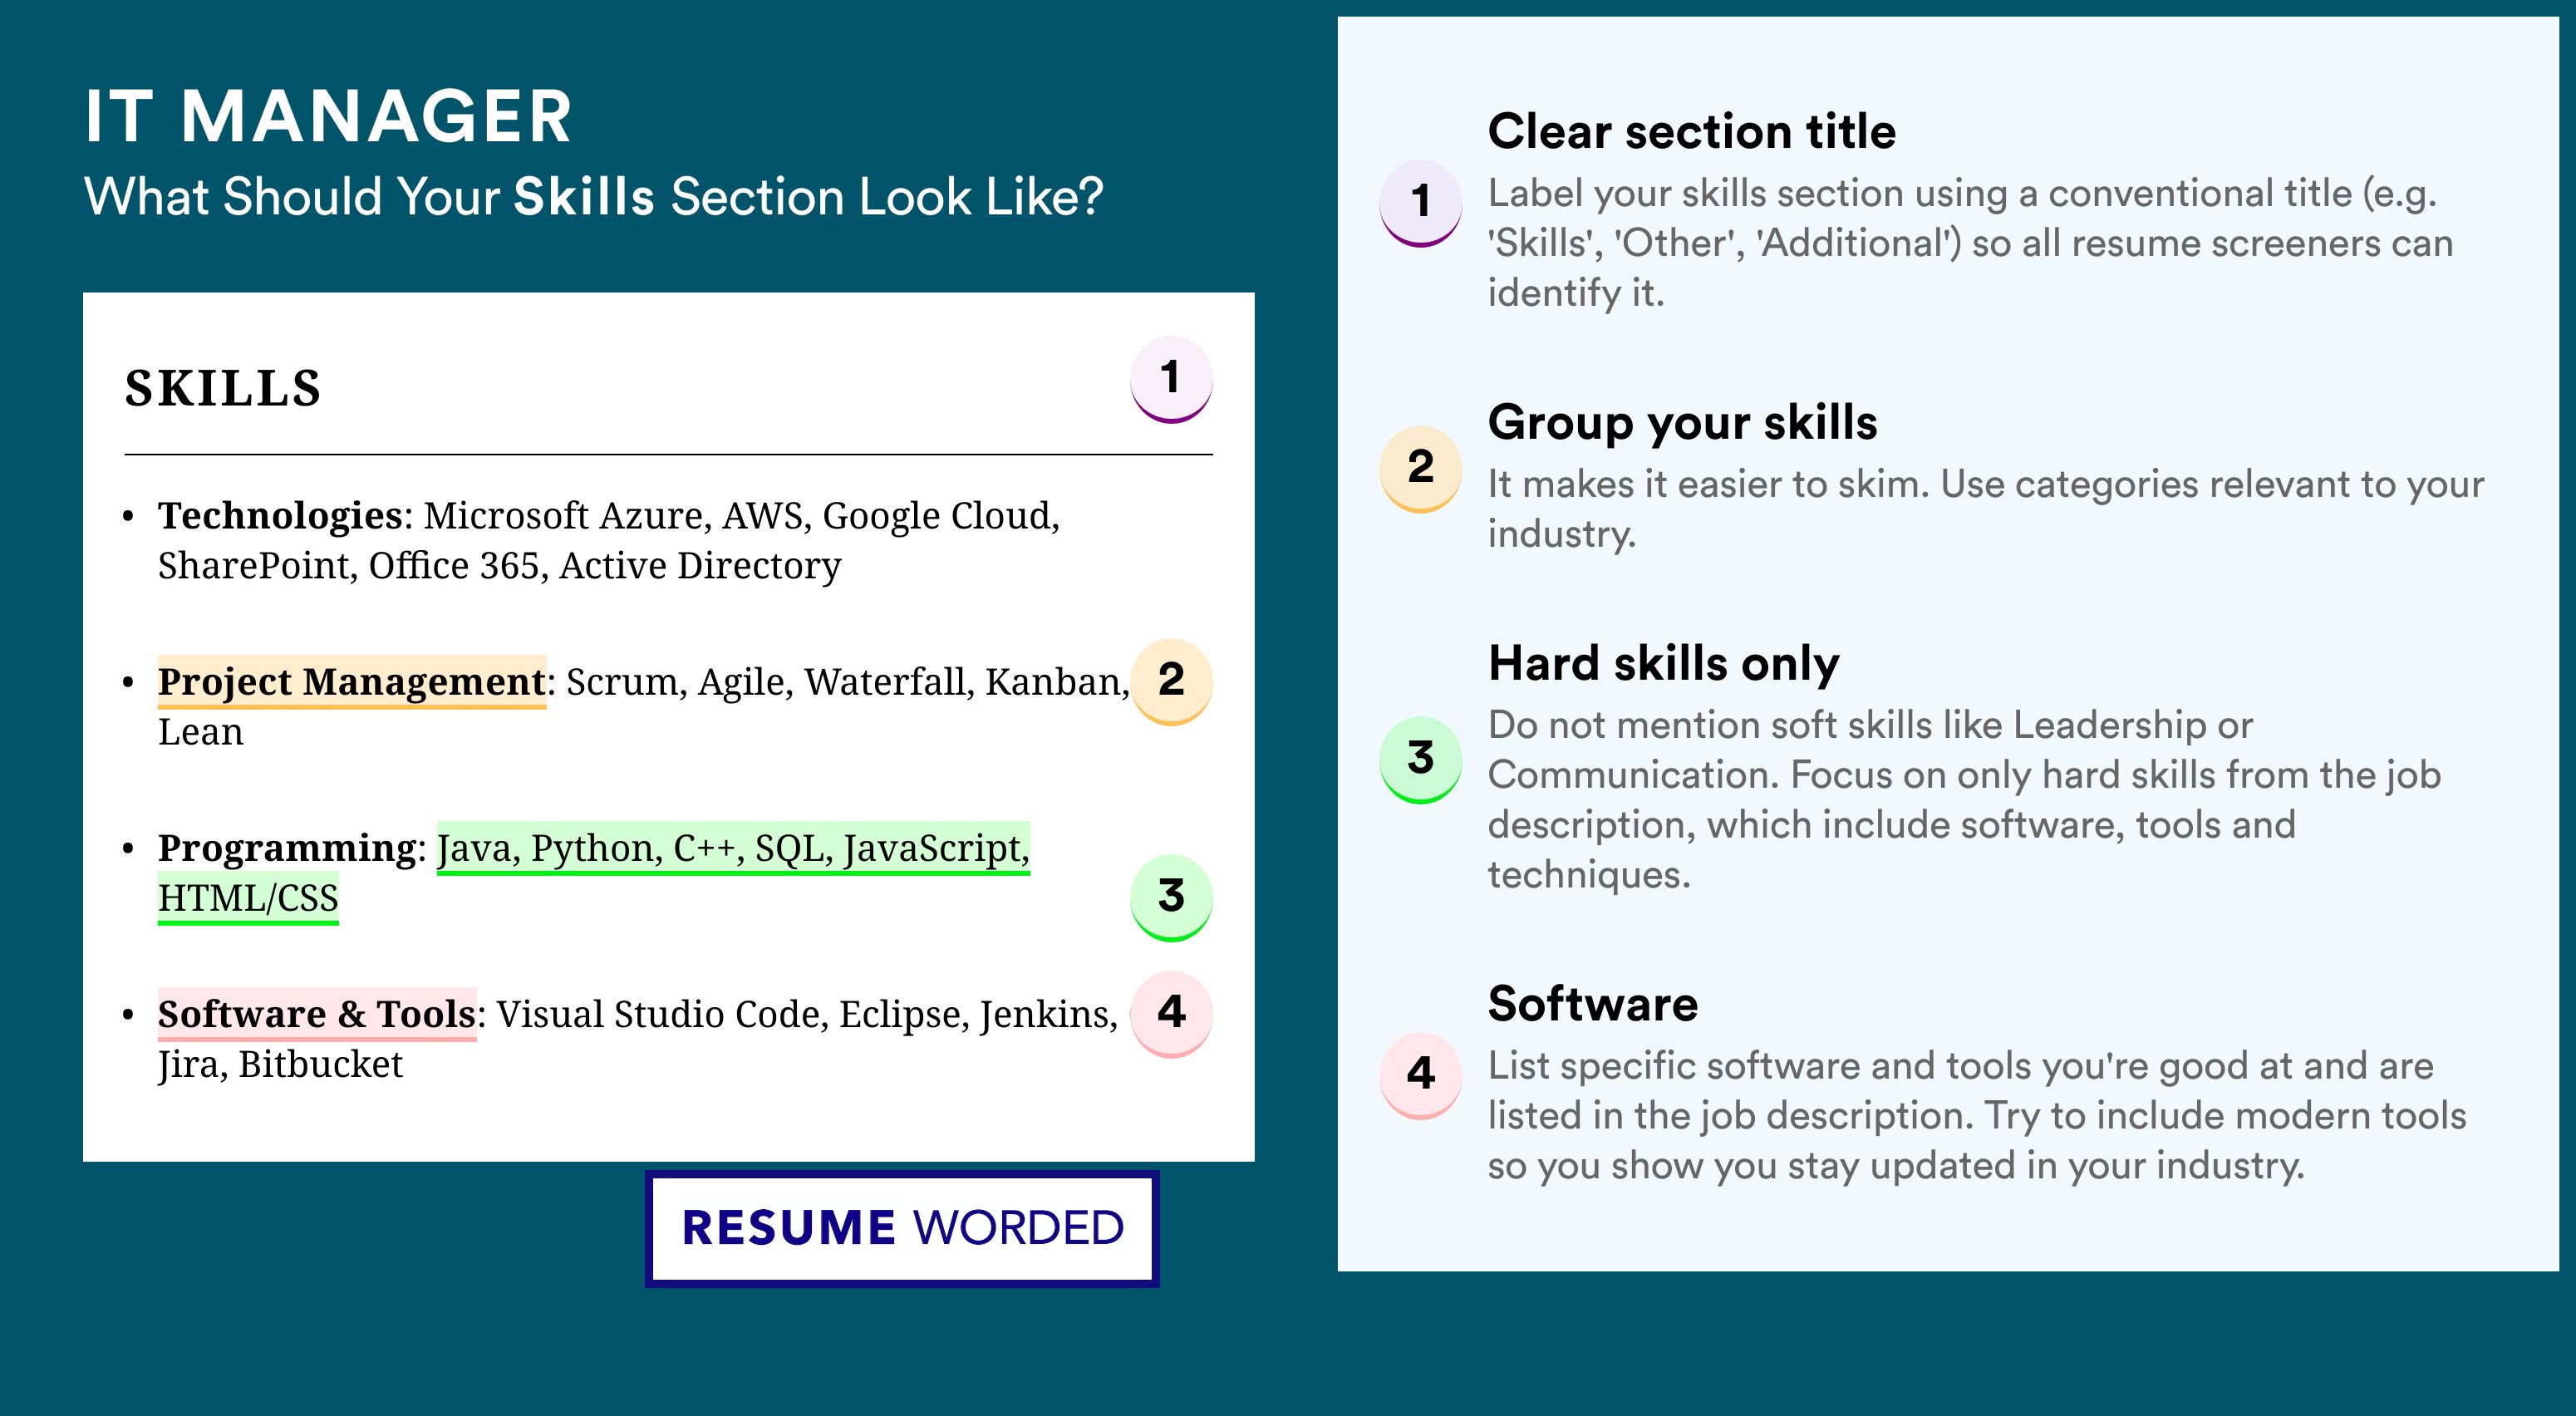 How To Write Your Skills Section - IT Manager Roles